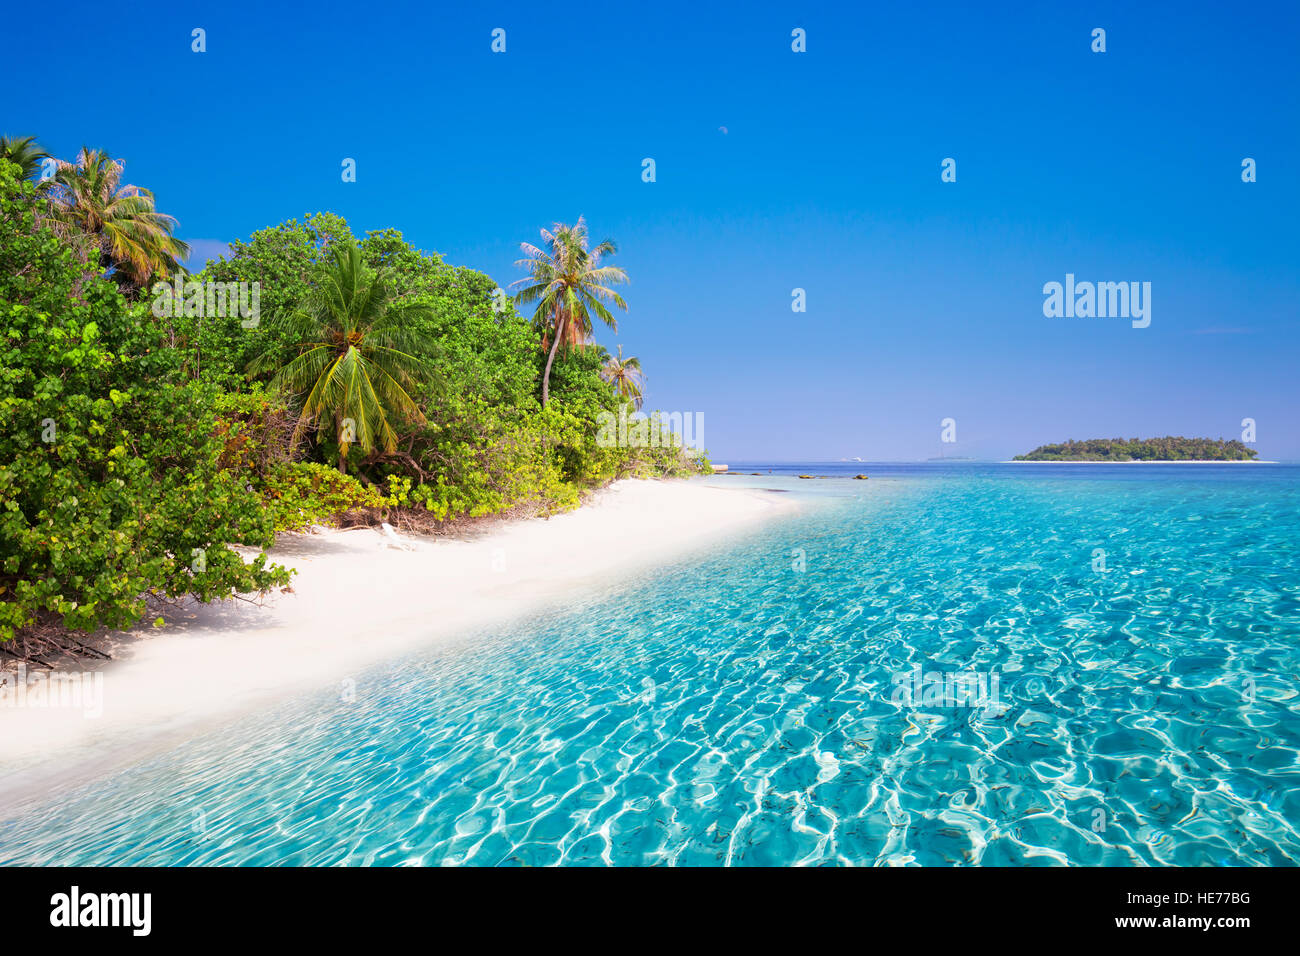 Tropical island with sandy beach with turquoise clear water and palm trees Stock Photo